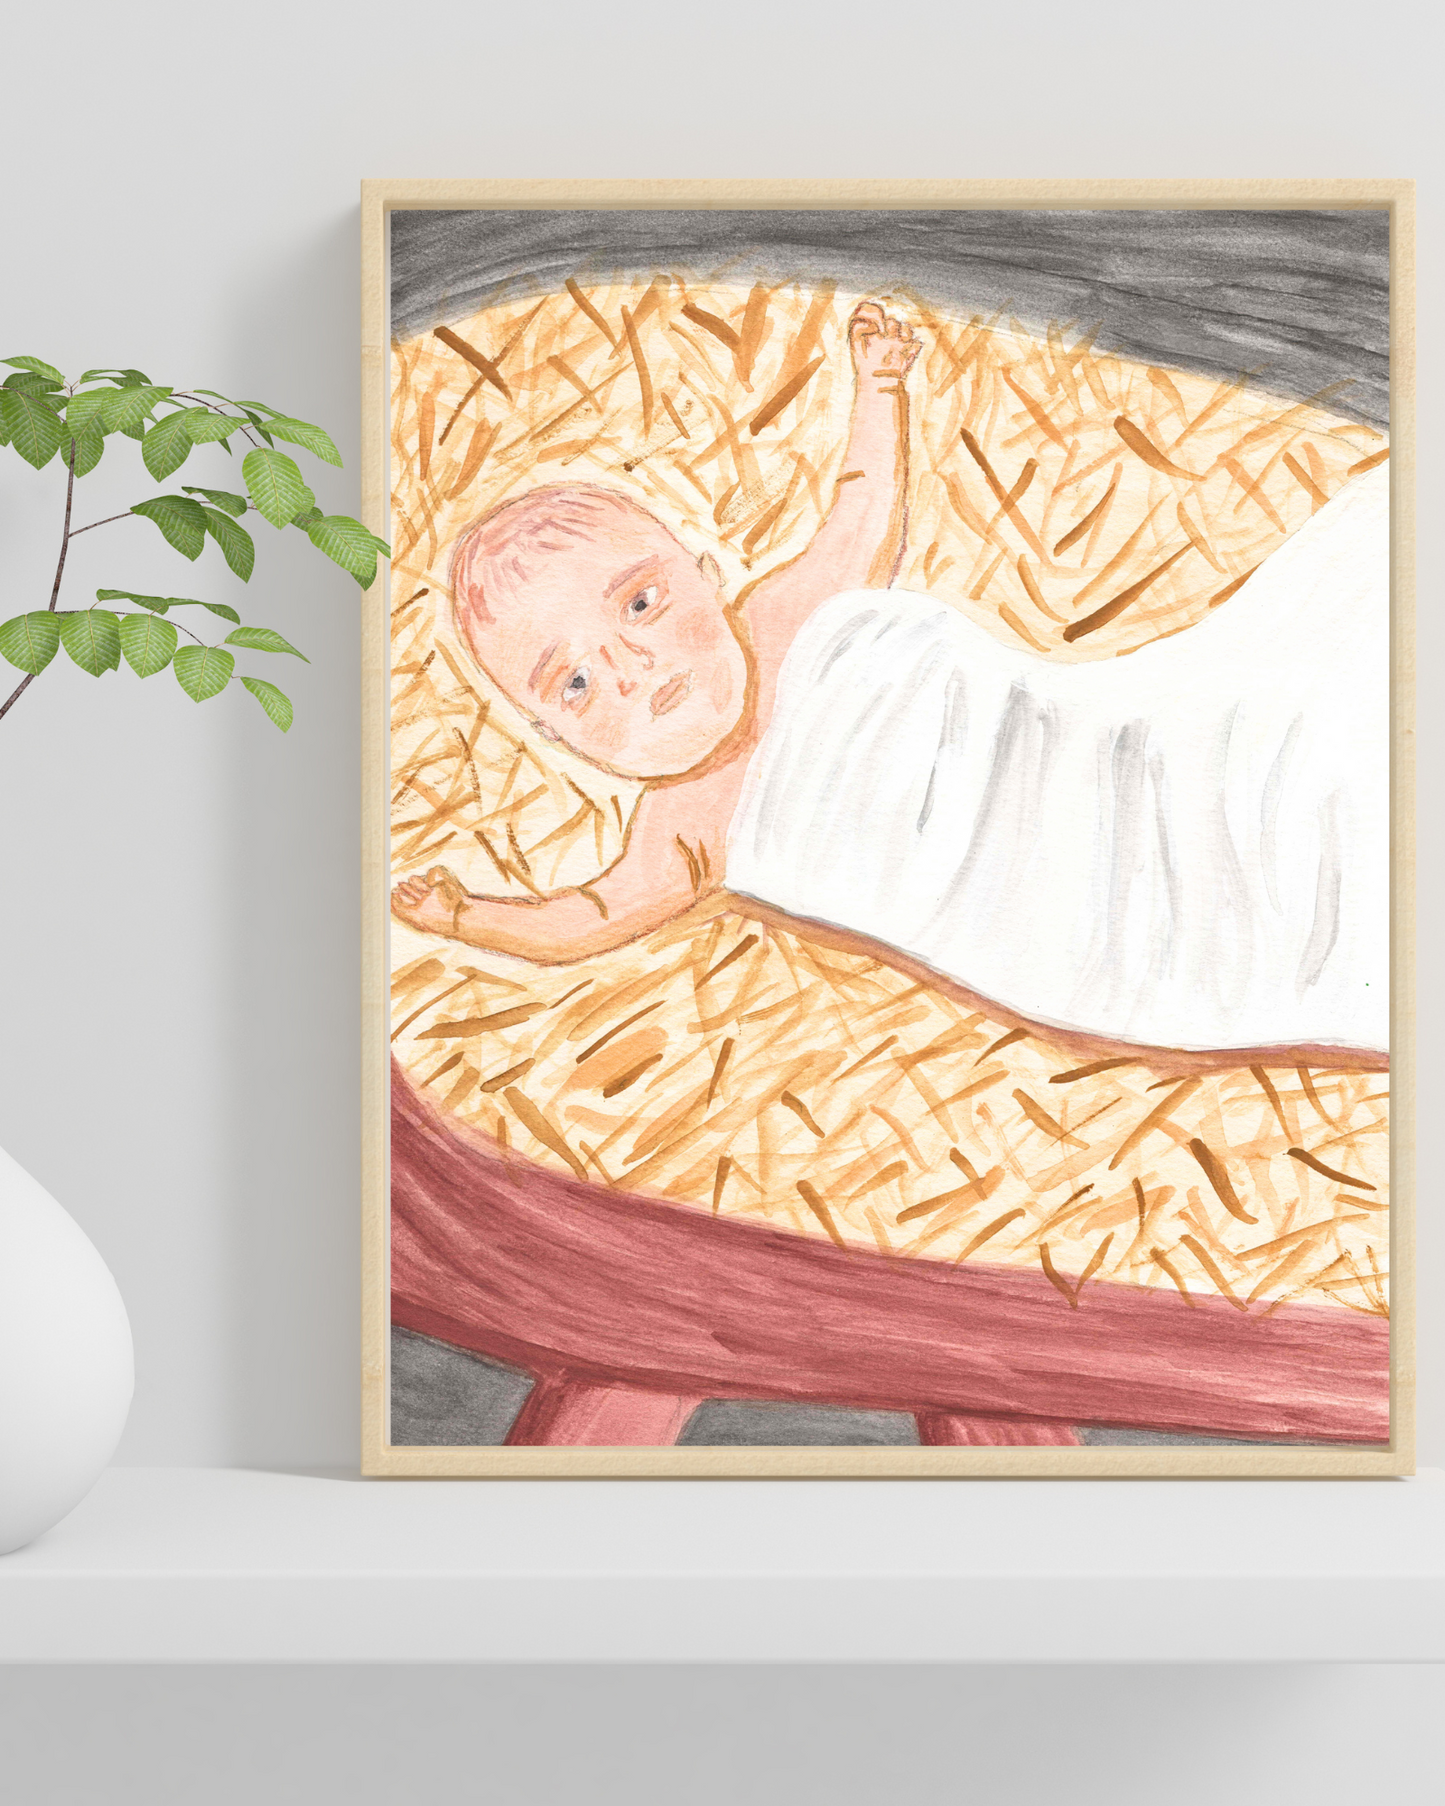 The Holy Family Collection of Watercolor Prints